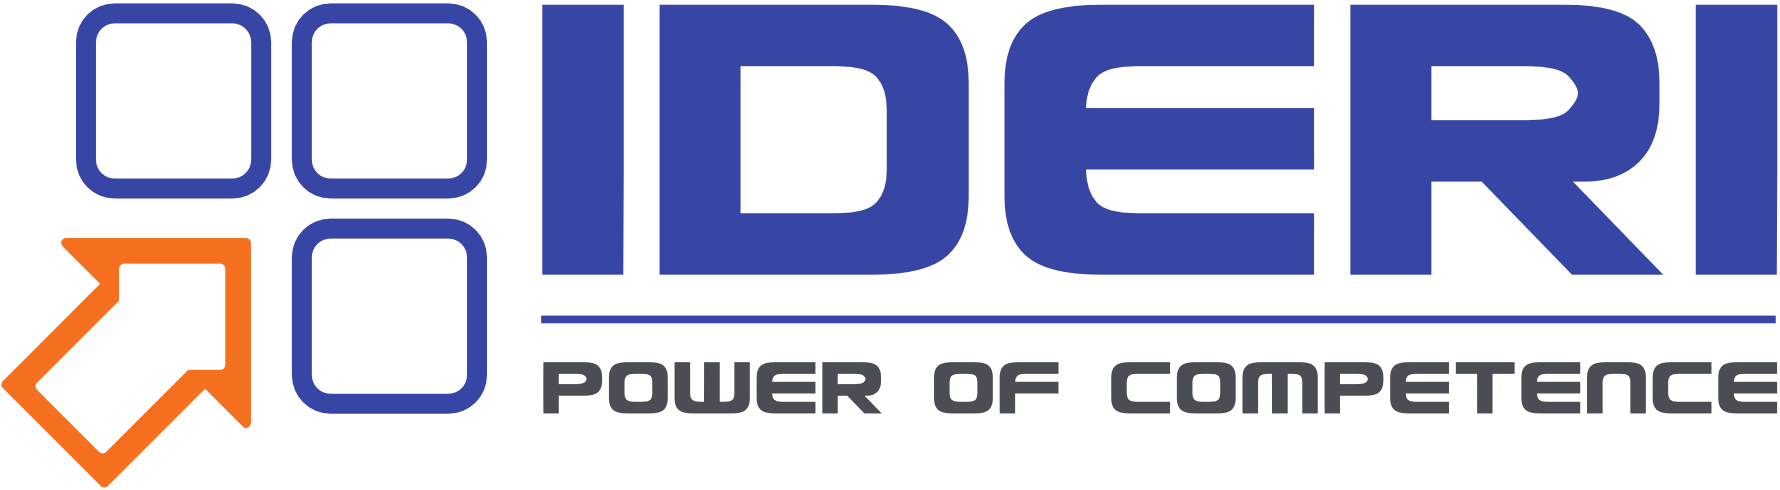 The IDERI logo on the ticker when floating or docked to the upper or lower edge of the screen